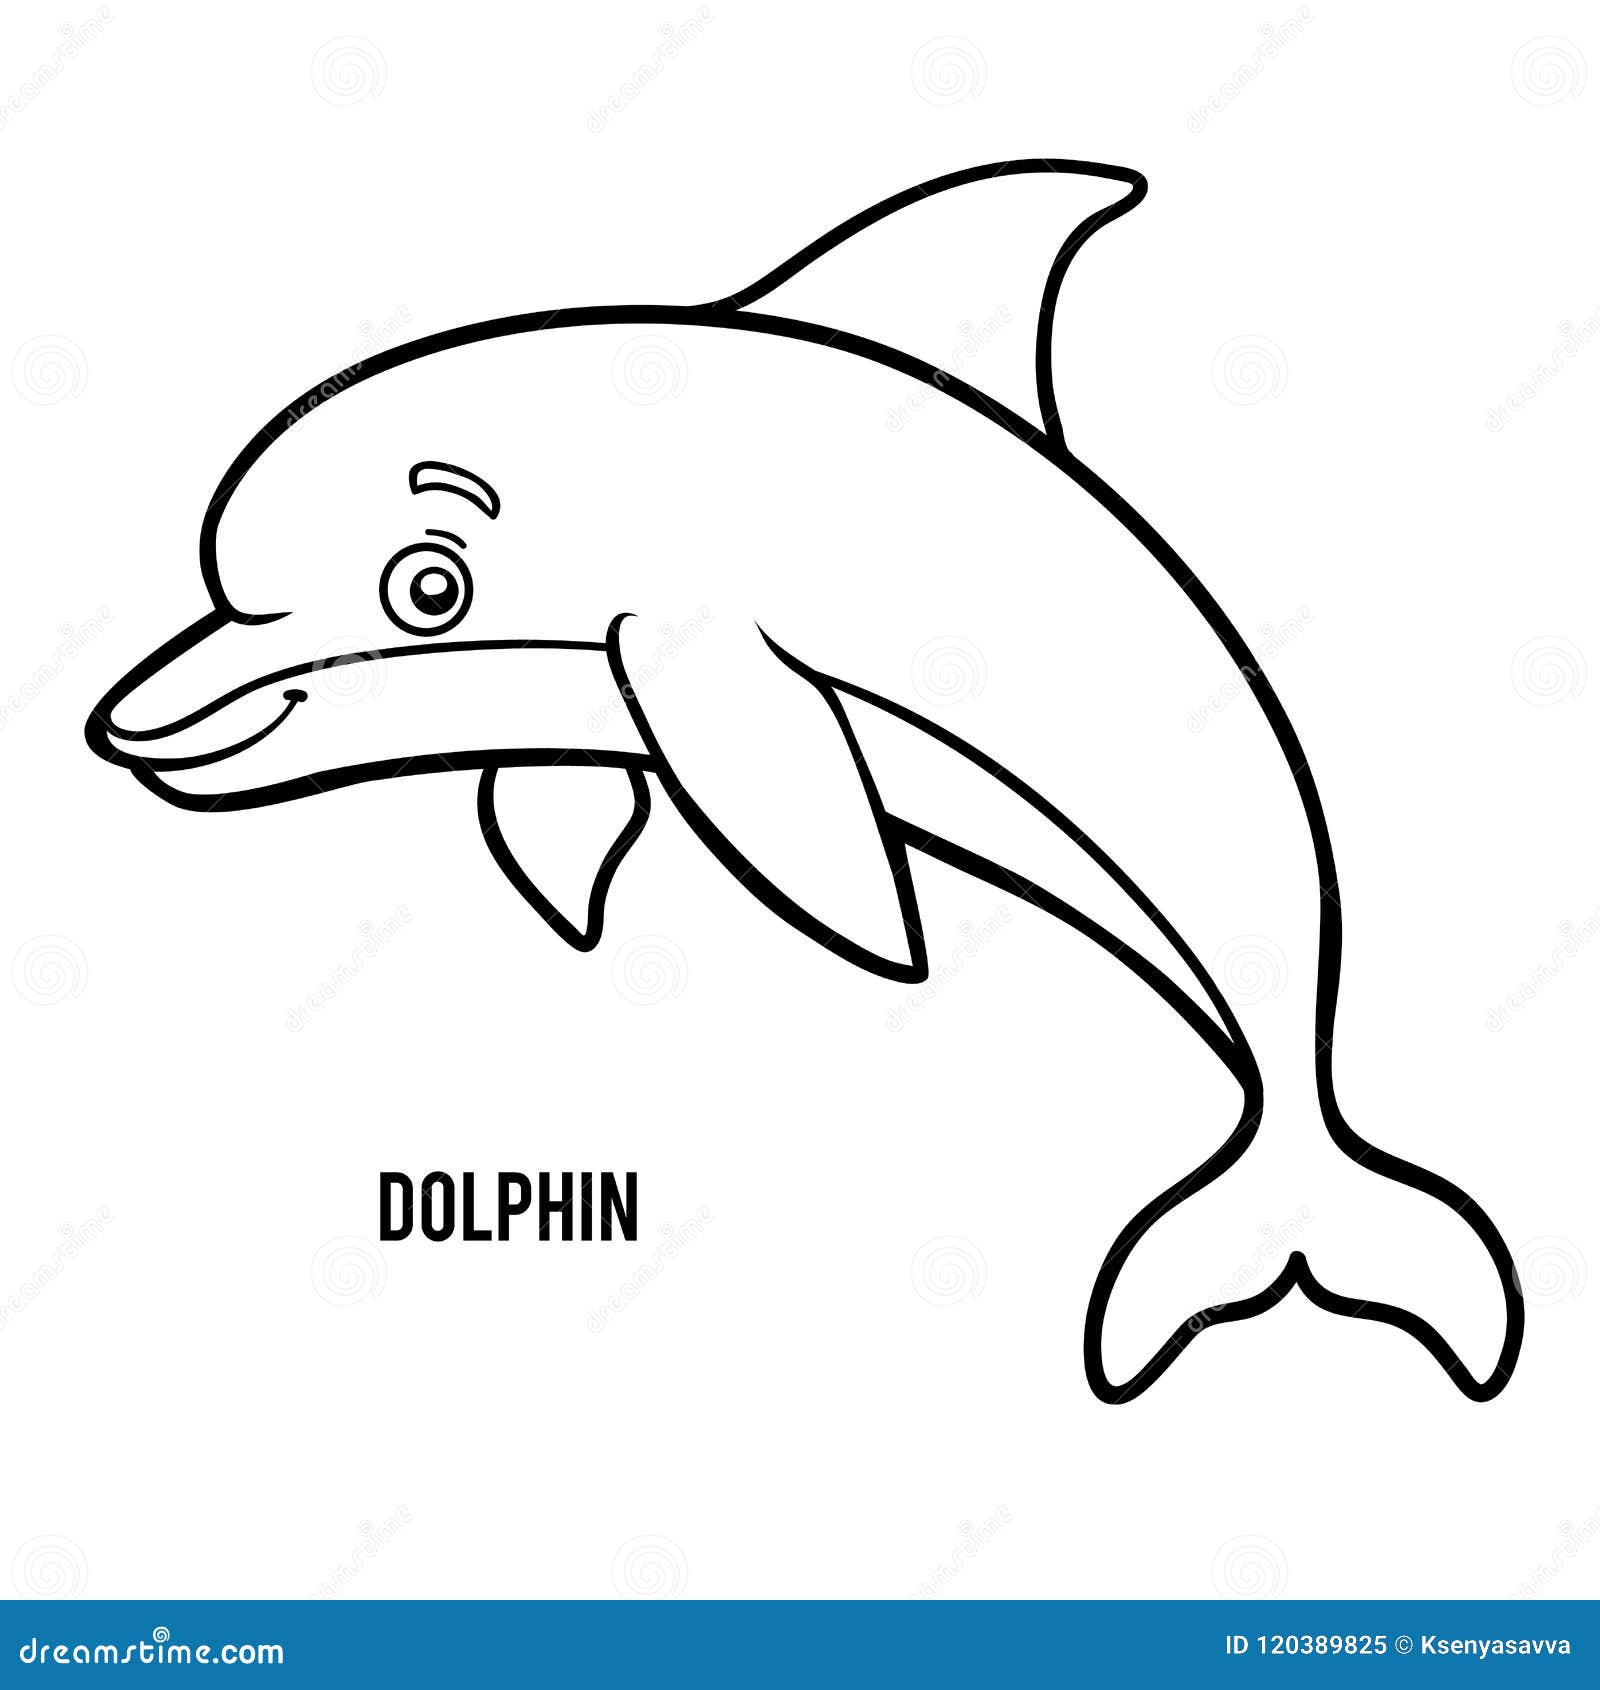 Dolphin Coloring Pages - Free Printable Images for Kids | Skip To My Lou